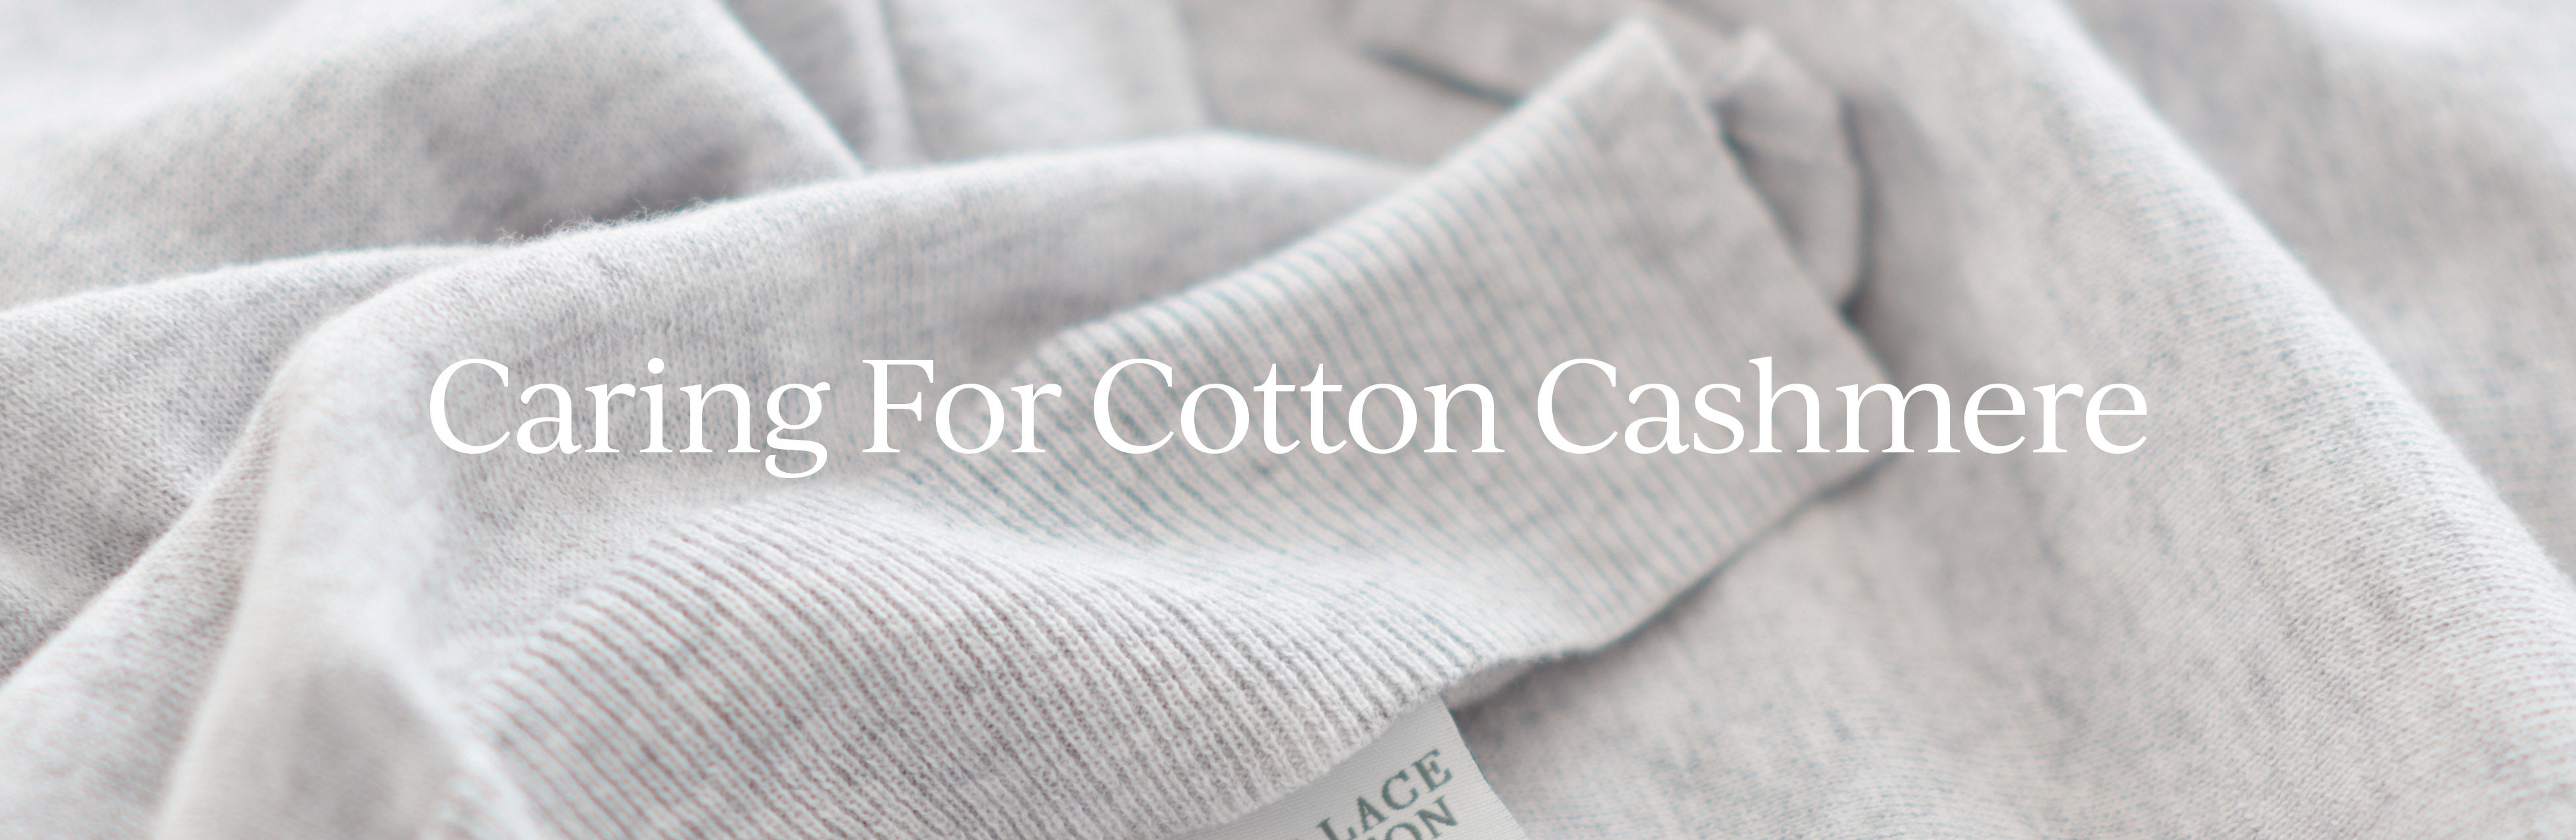 Caring for Cotton Cashmere